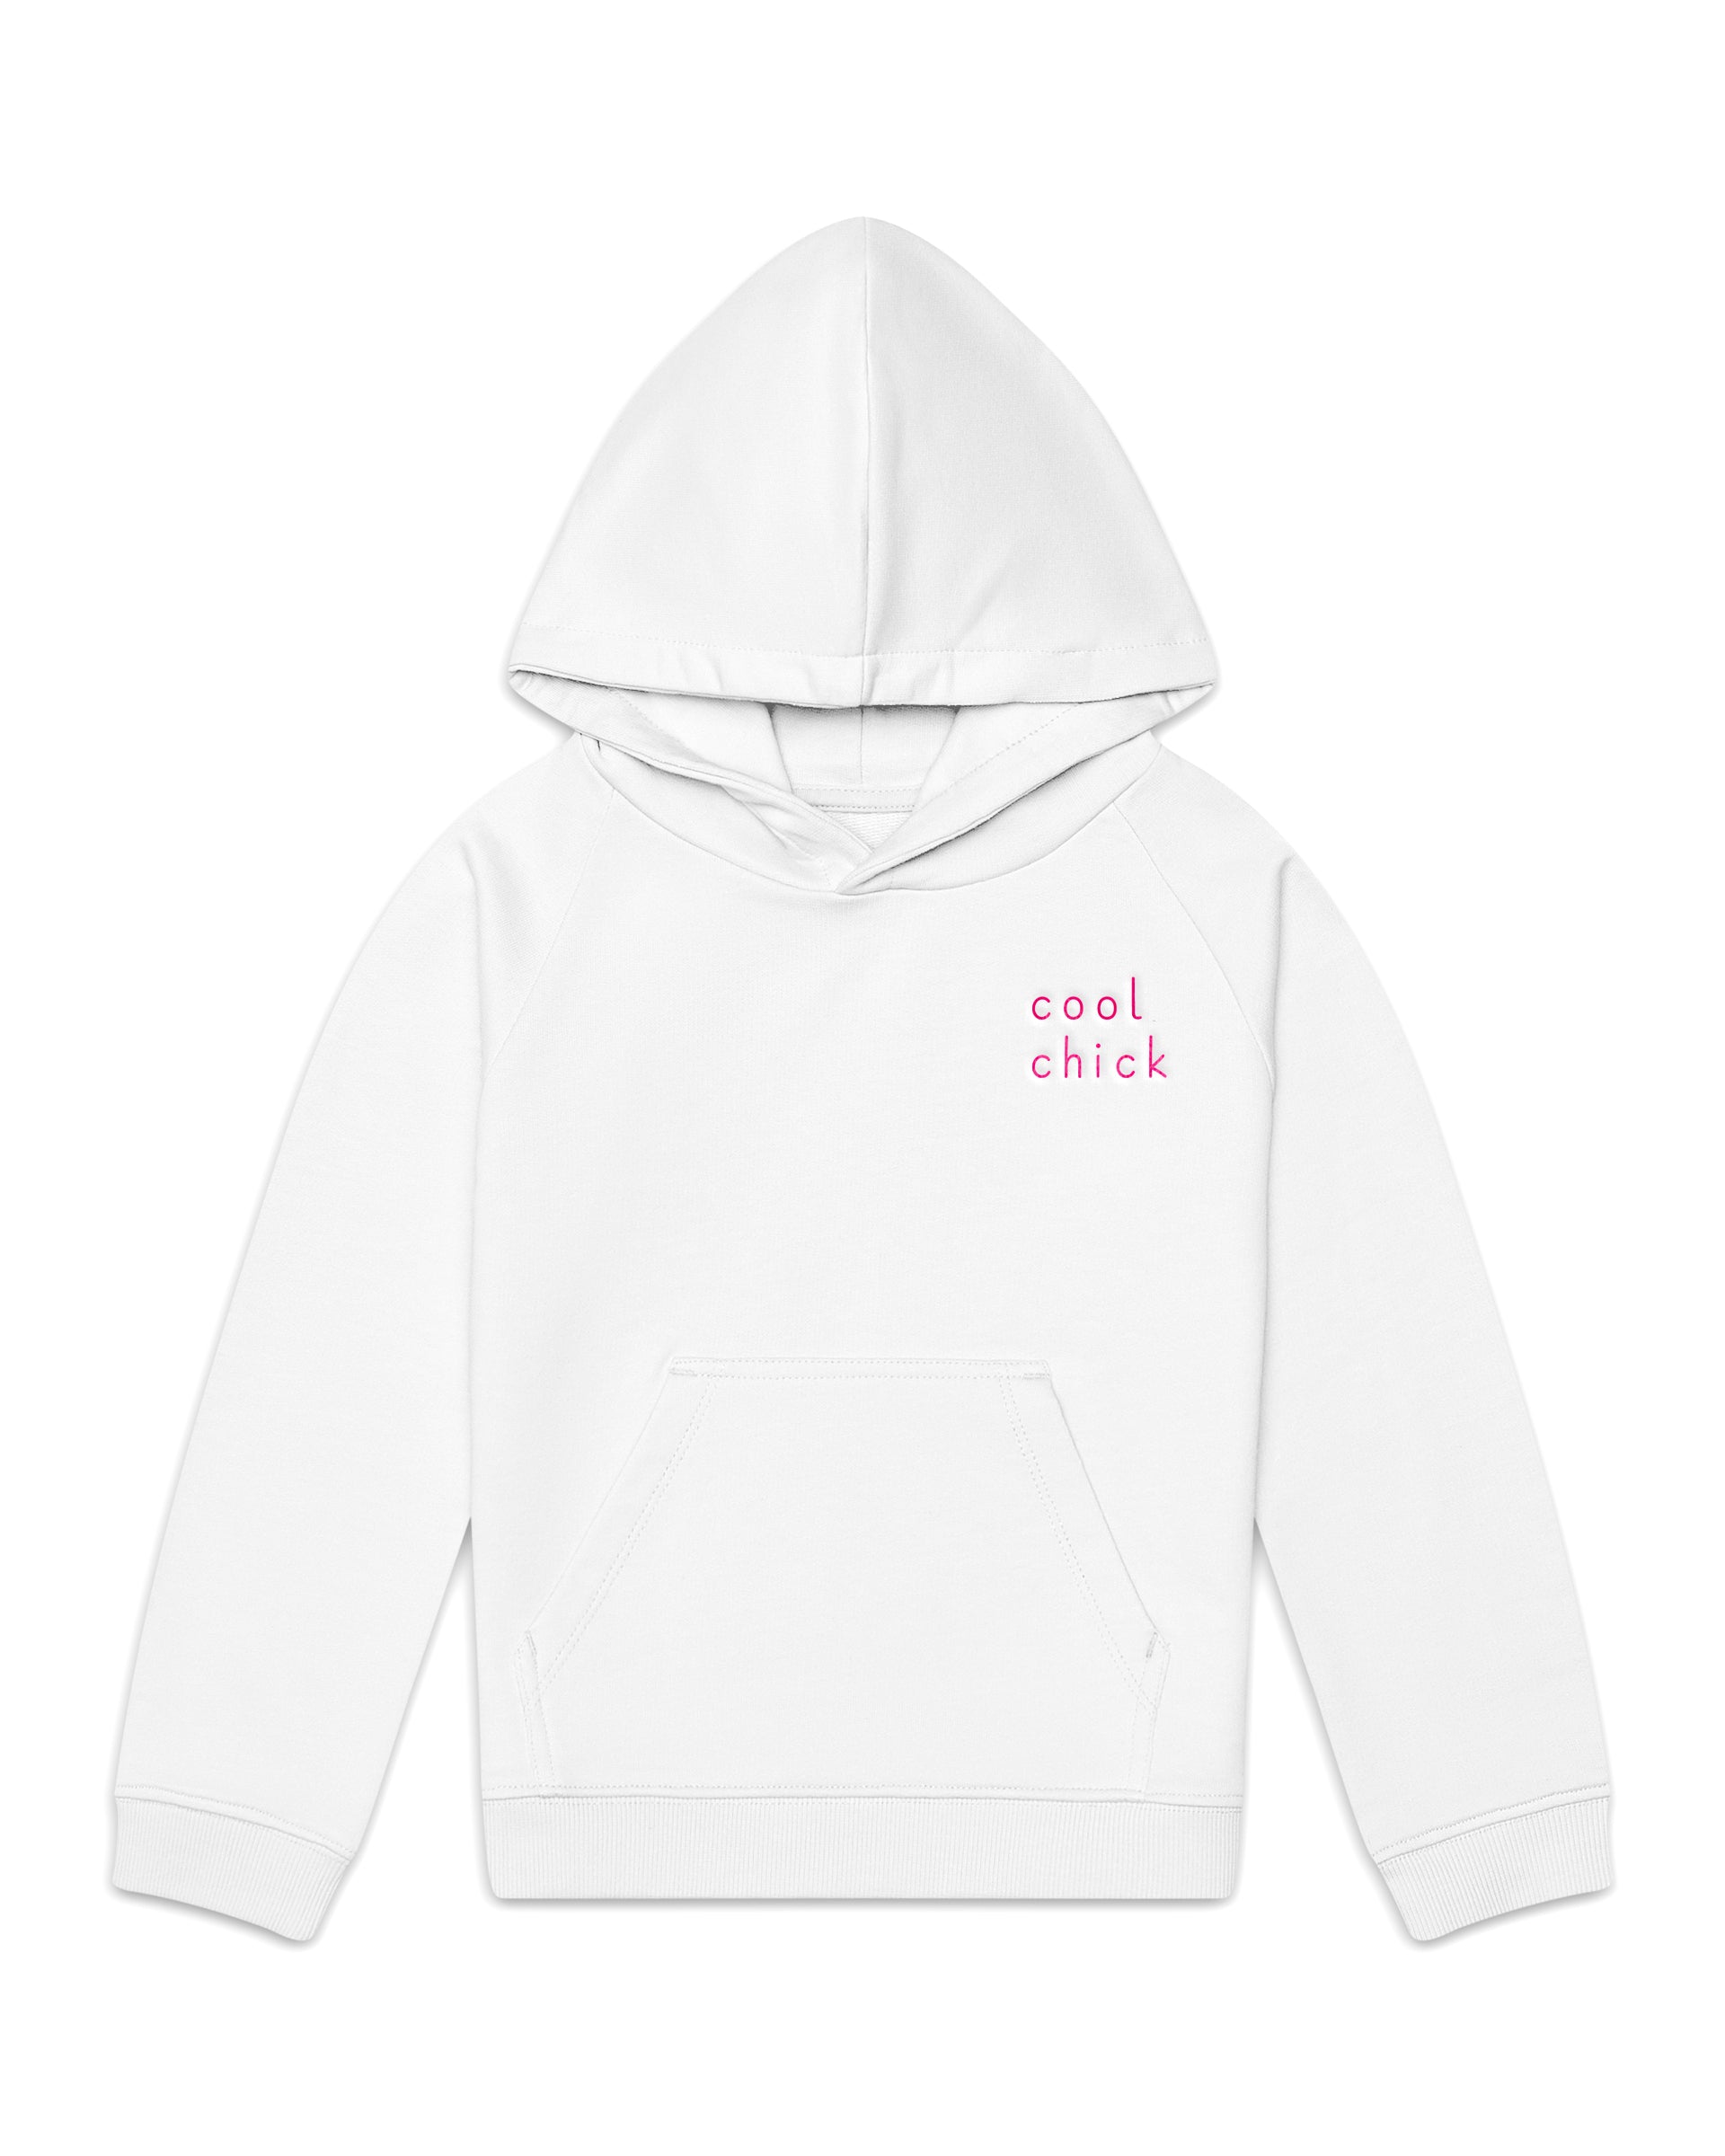 The Organic Embroidered Hoodie Sweatshirt [Cool Chick]